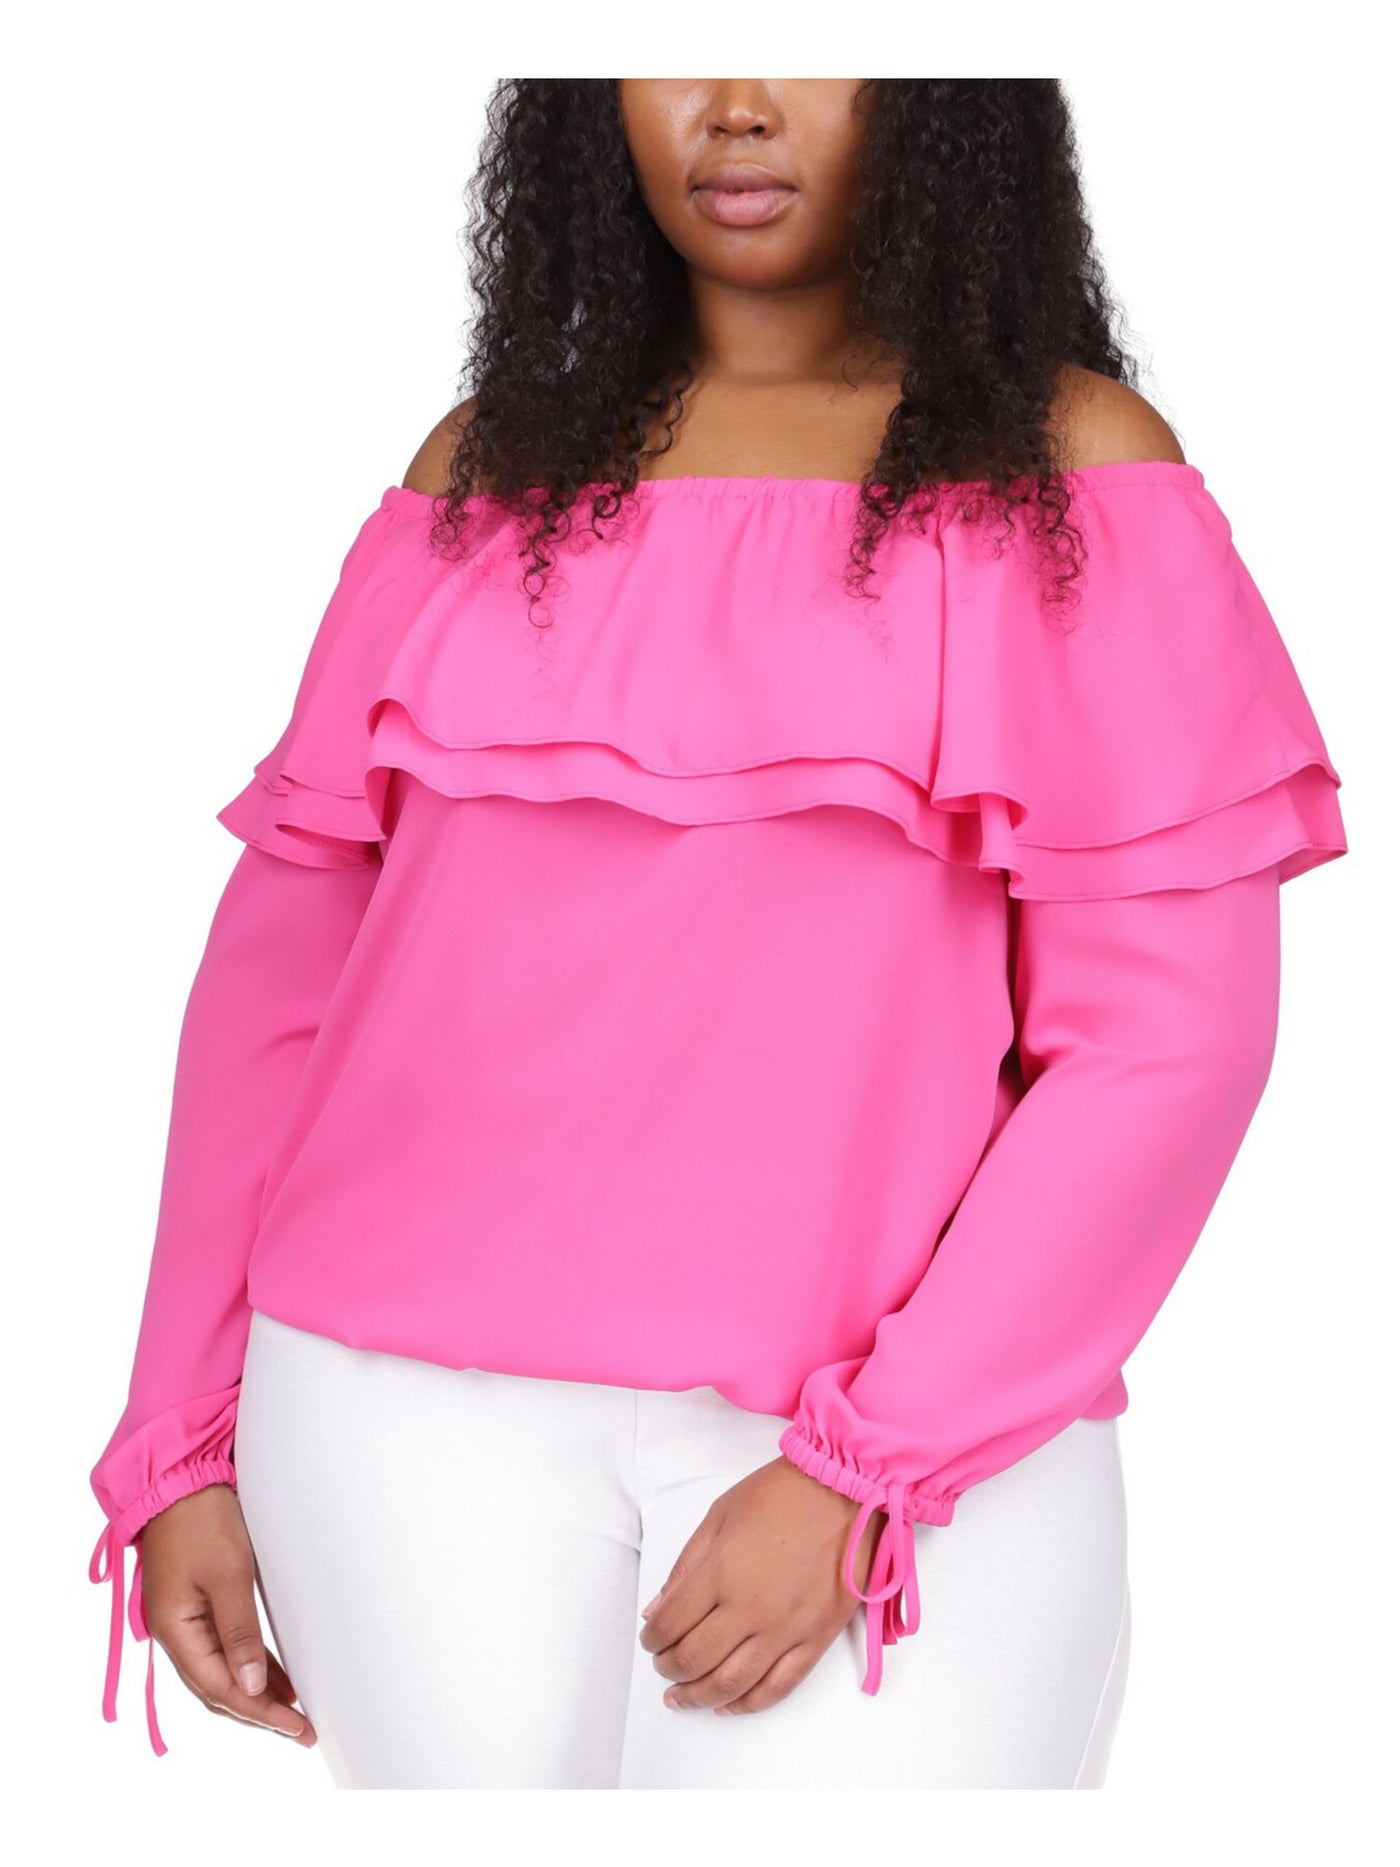 MICHAEL KORS Womens Pink Ruffled Tie Elastic Cuffs Long Sleeve Off Shoulder Party Top Plus 0X